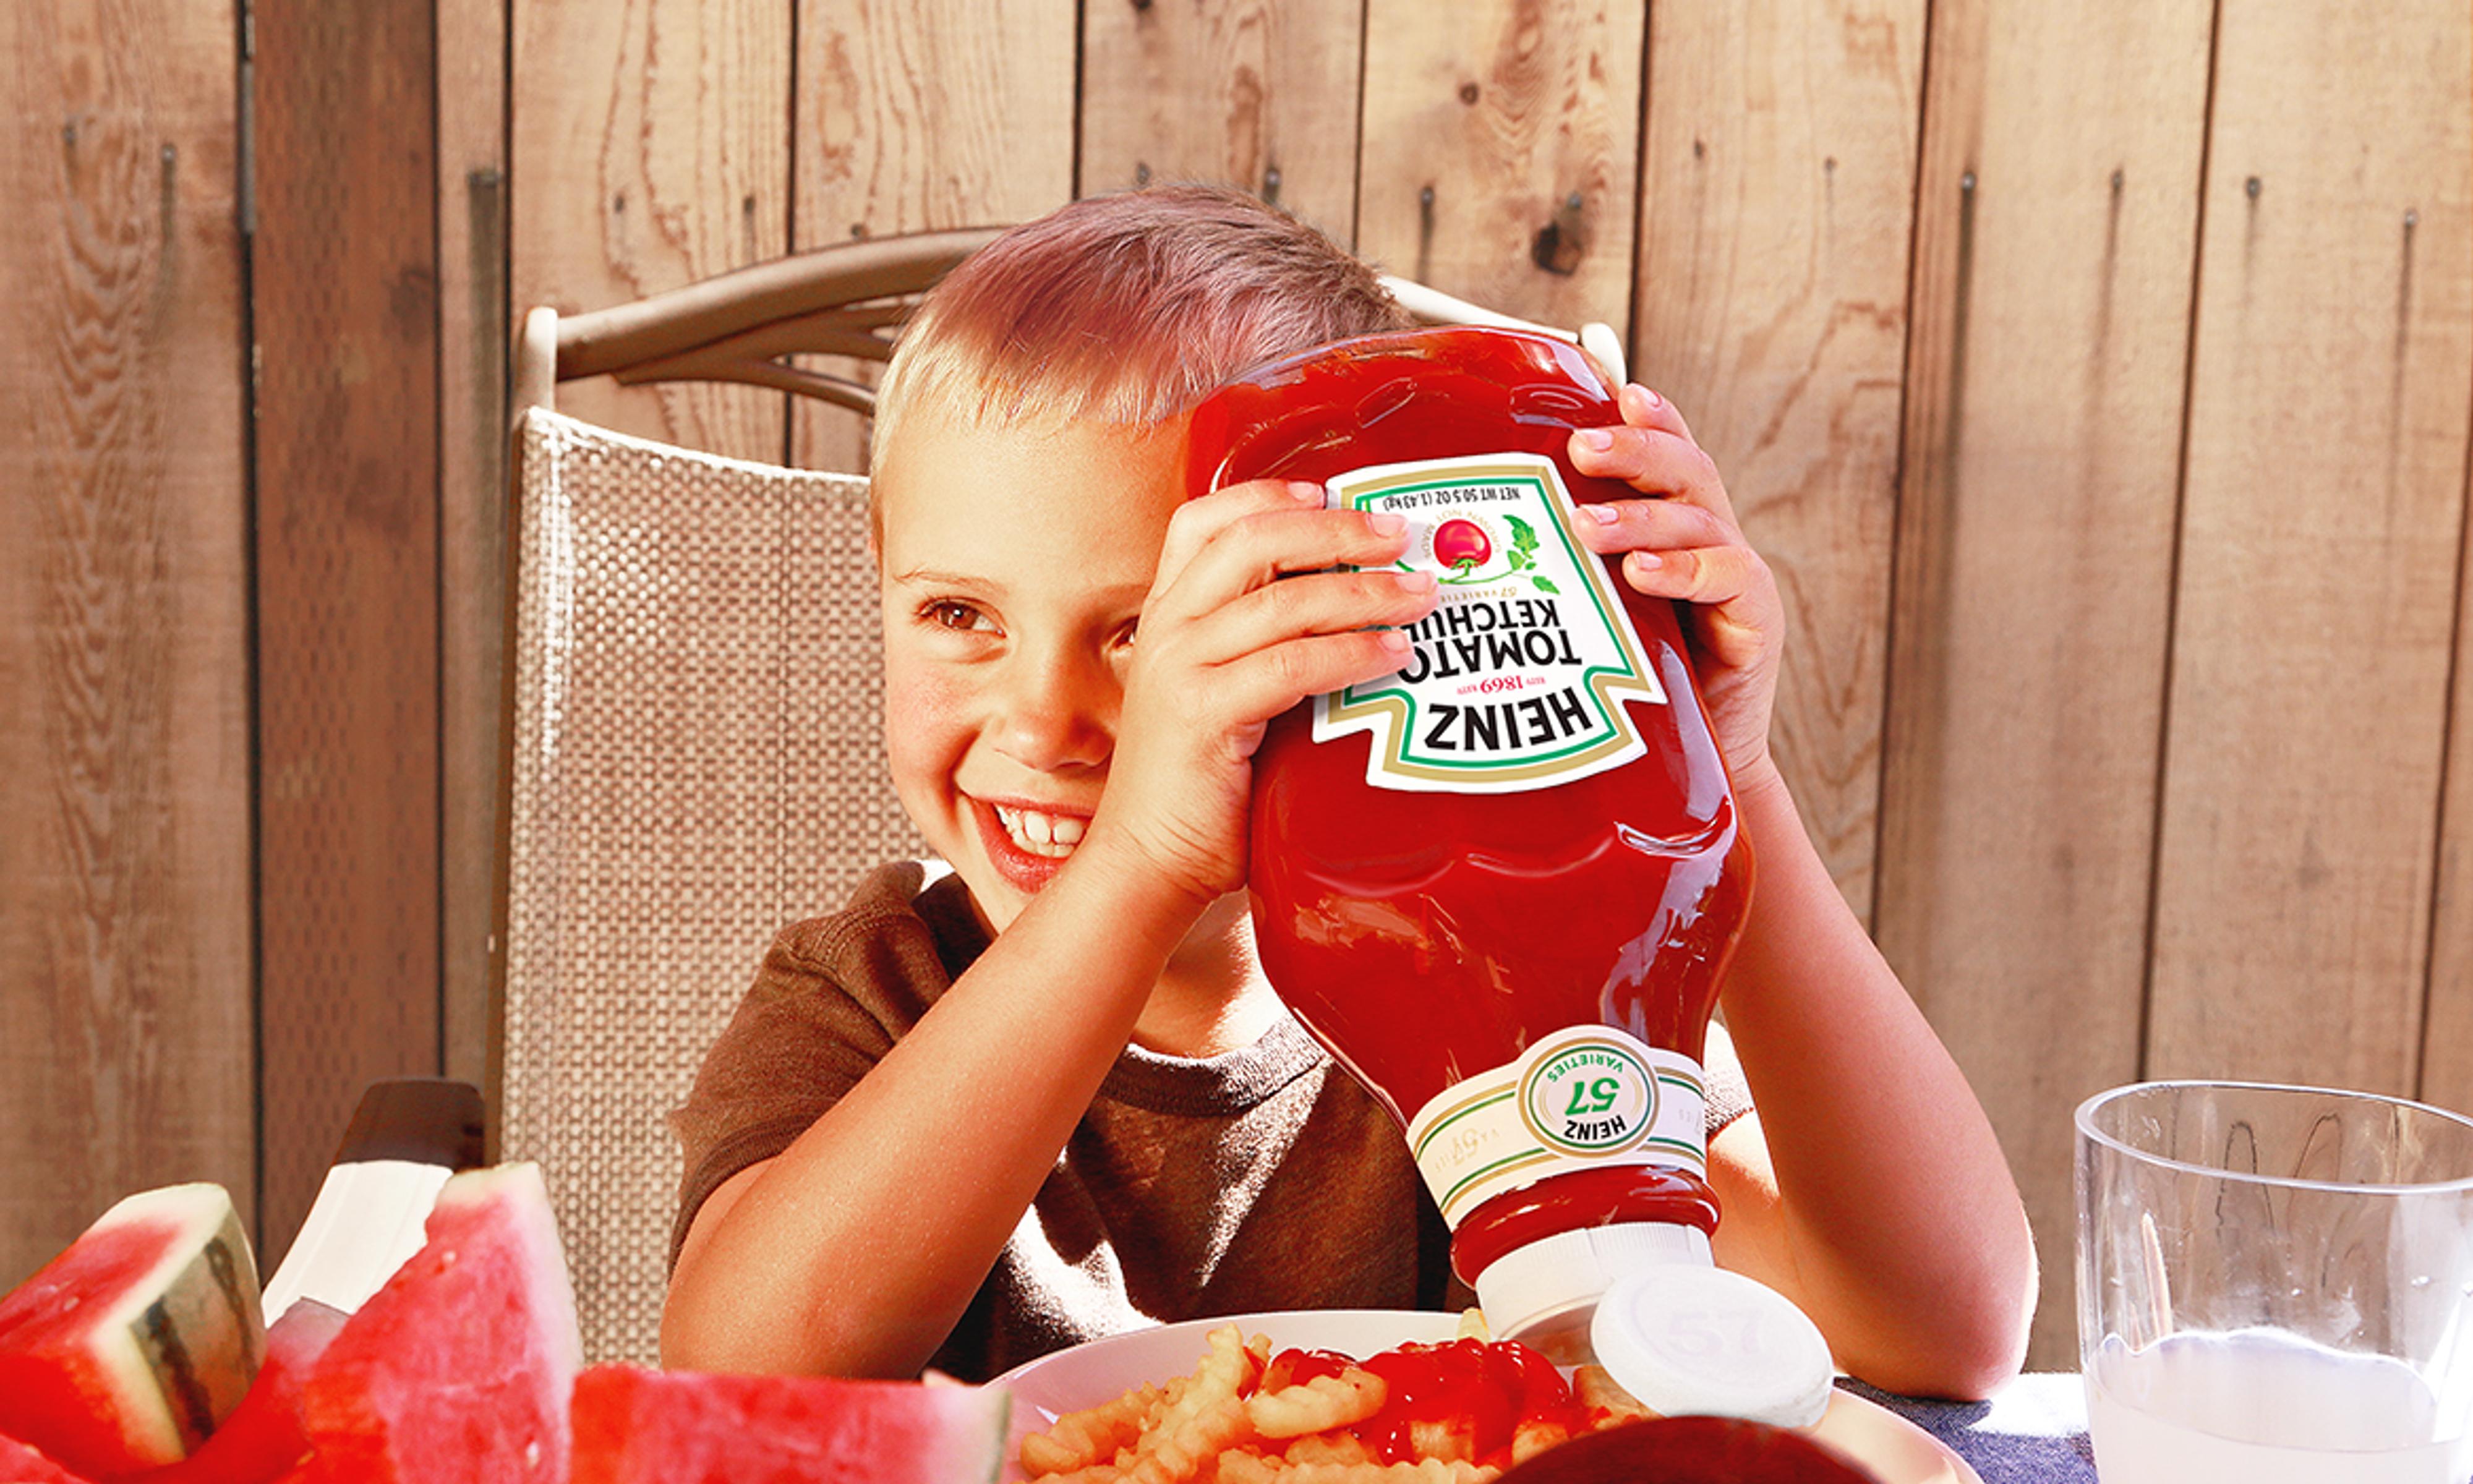 Child smiling and holding a Heinz ketchup bottle upside down above a plate of fries with ketchup on them